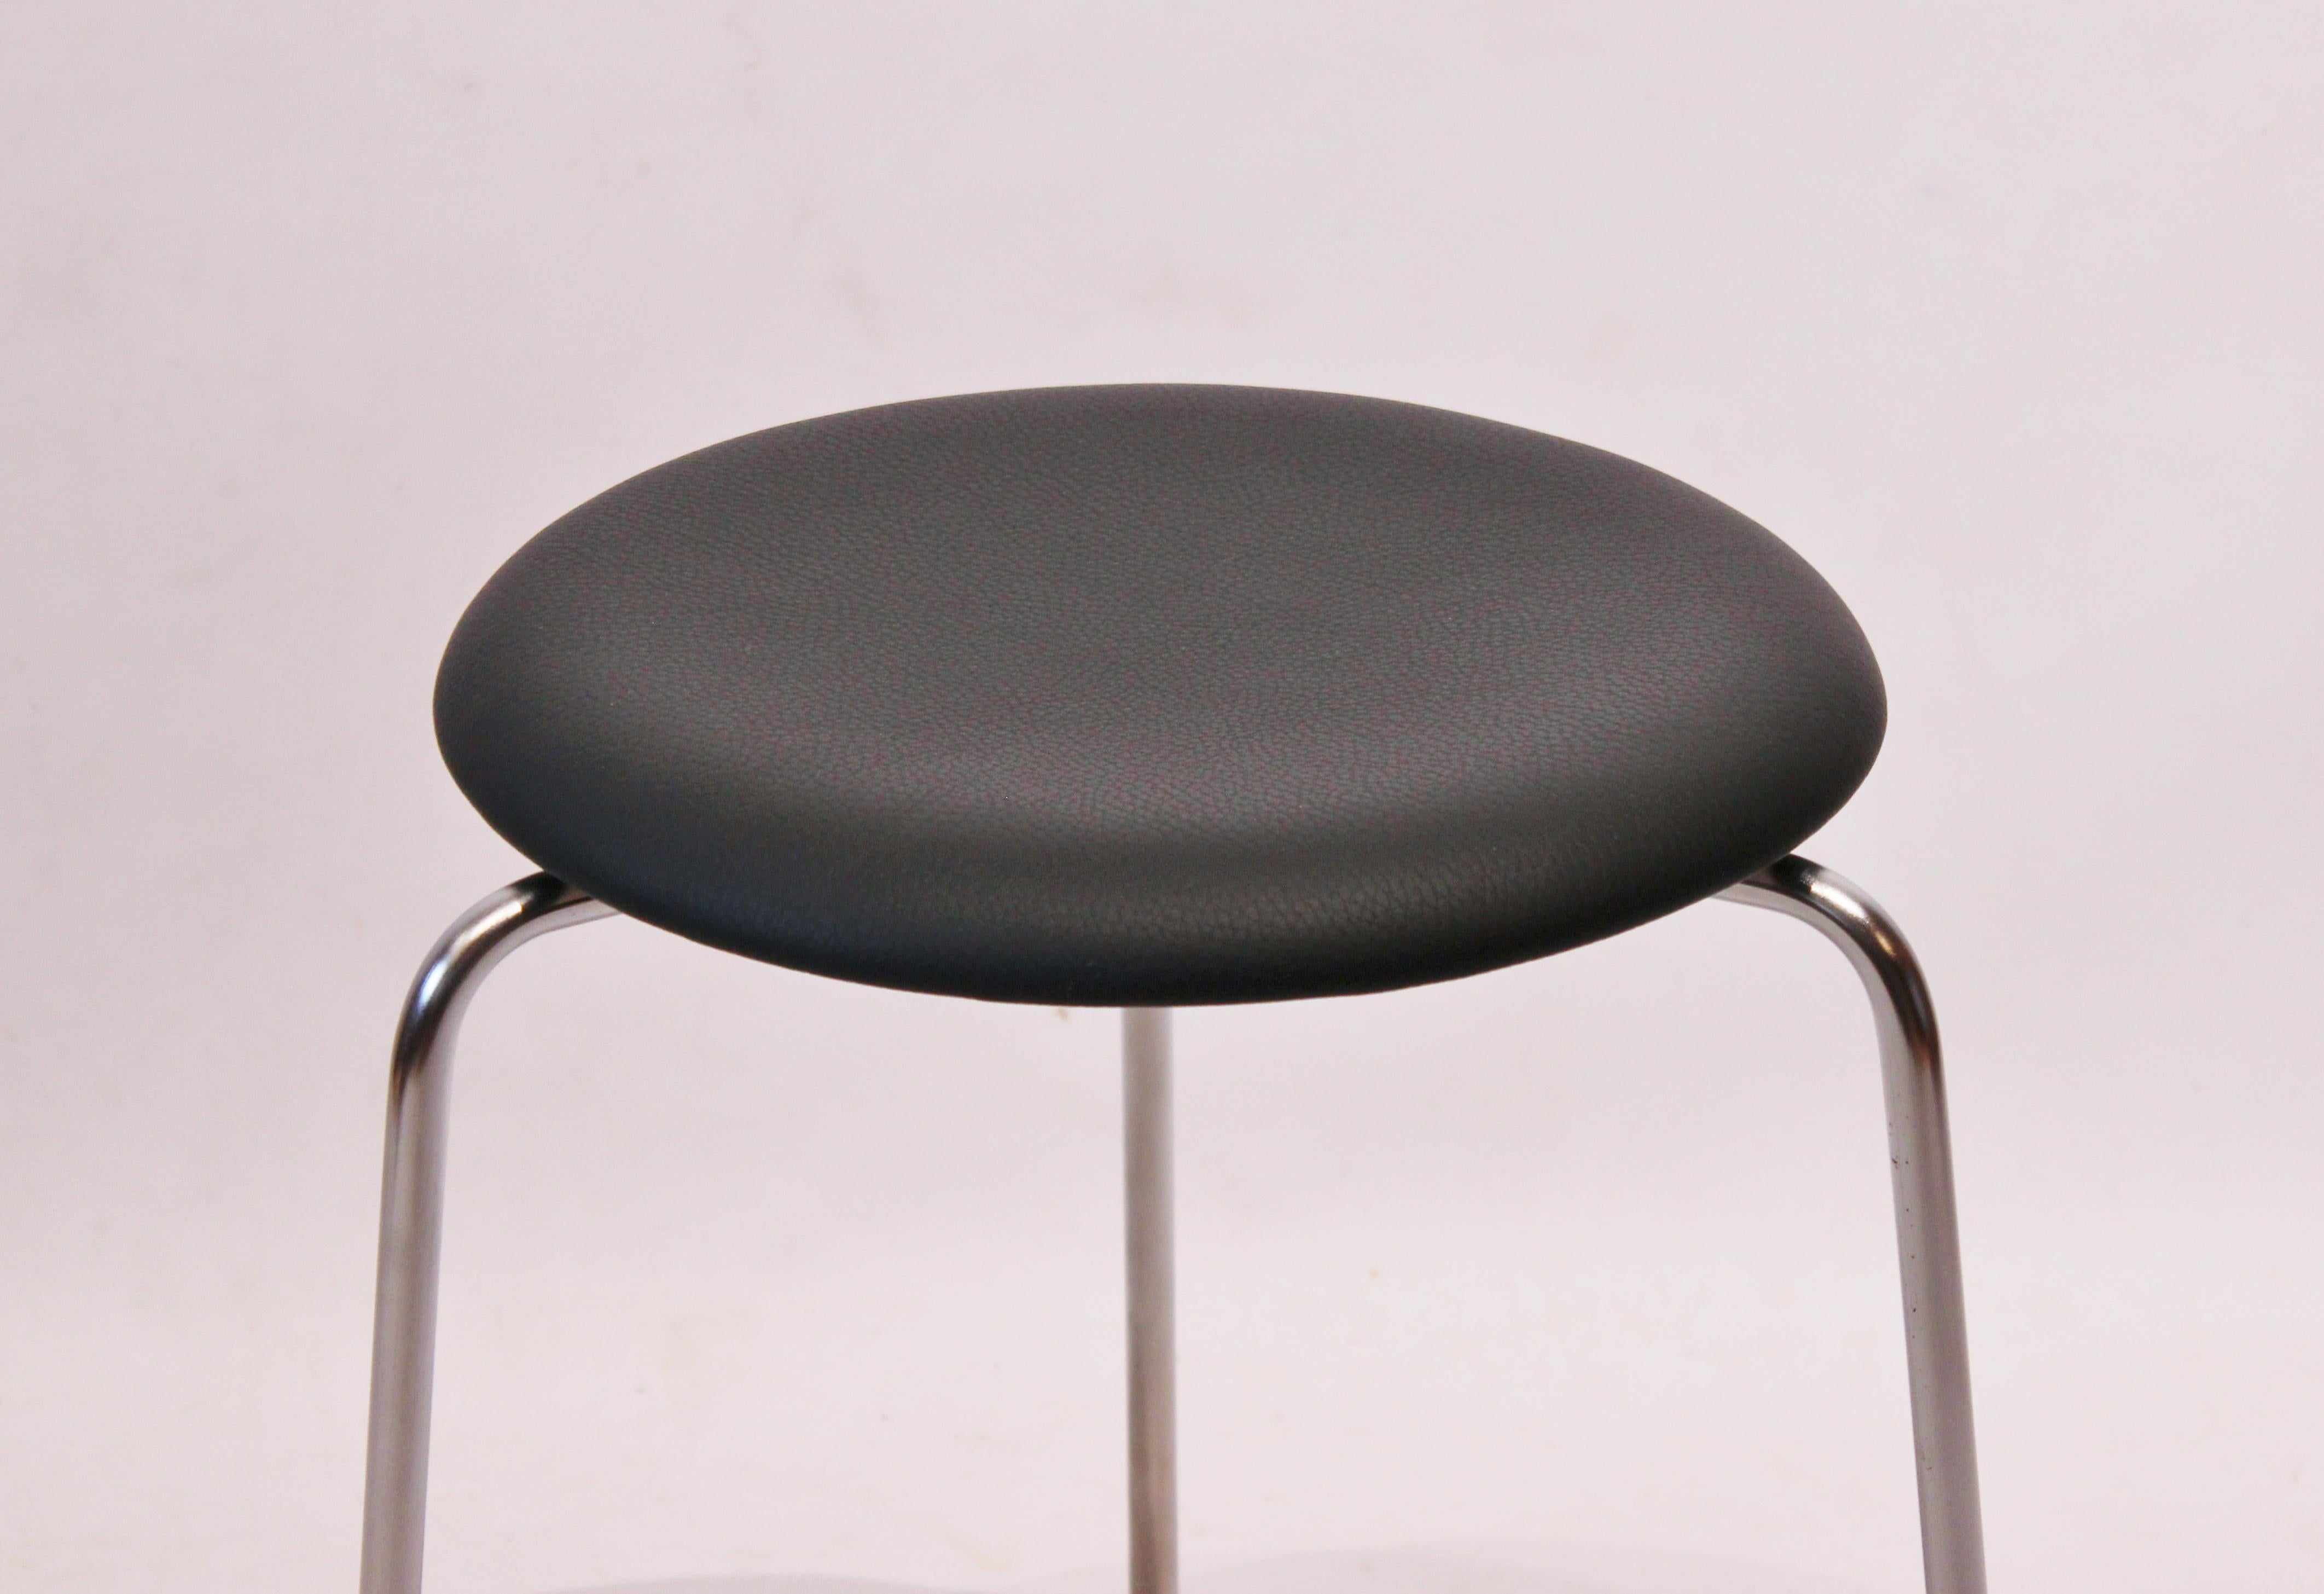 Dot Skammel, designed by the renowned Danish architect Arne Jacobsen in 1971, is a timeless piece of furniture that exudes simplicity and elegance. Produced by the renowned Danish furniture company Fritz Hansen, this stool represents a perfect